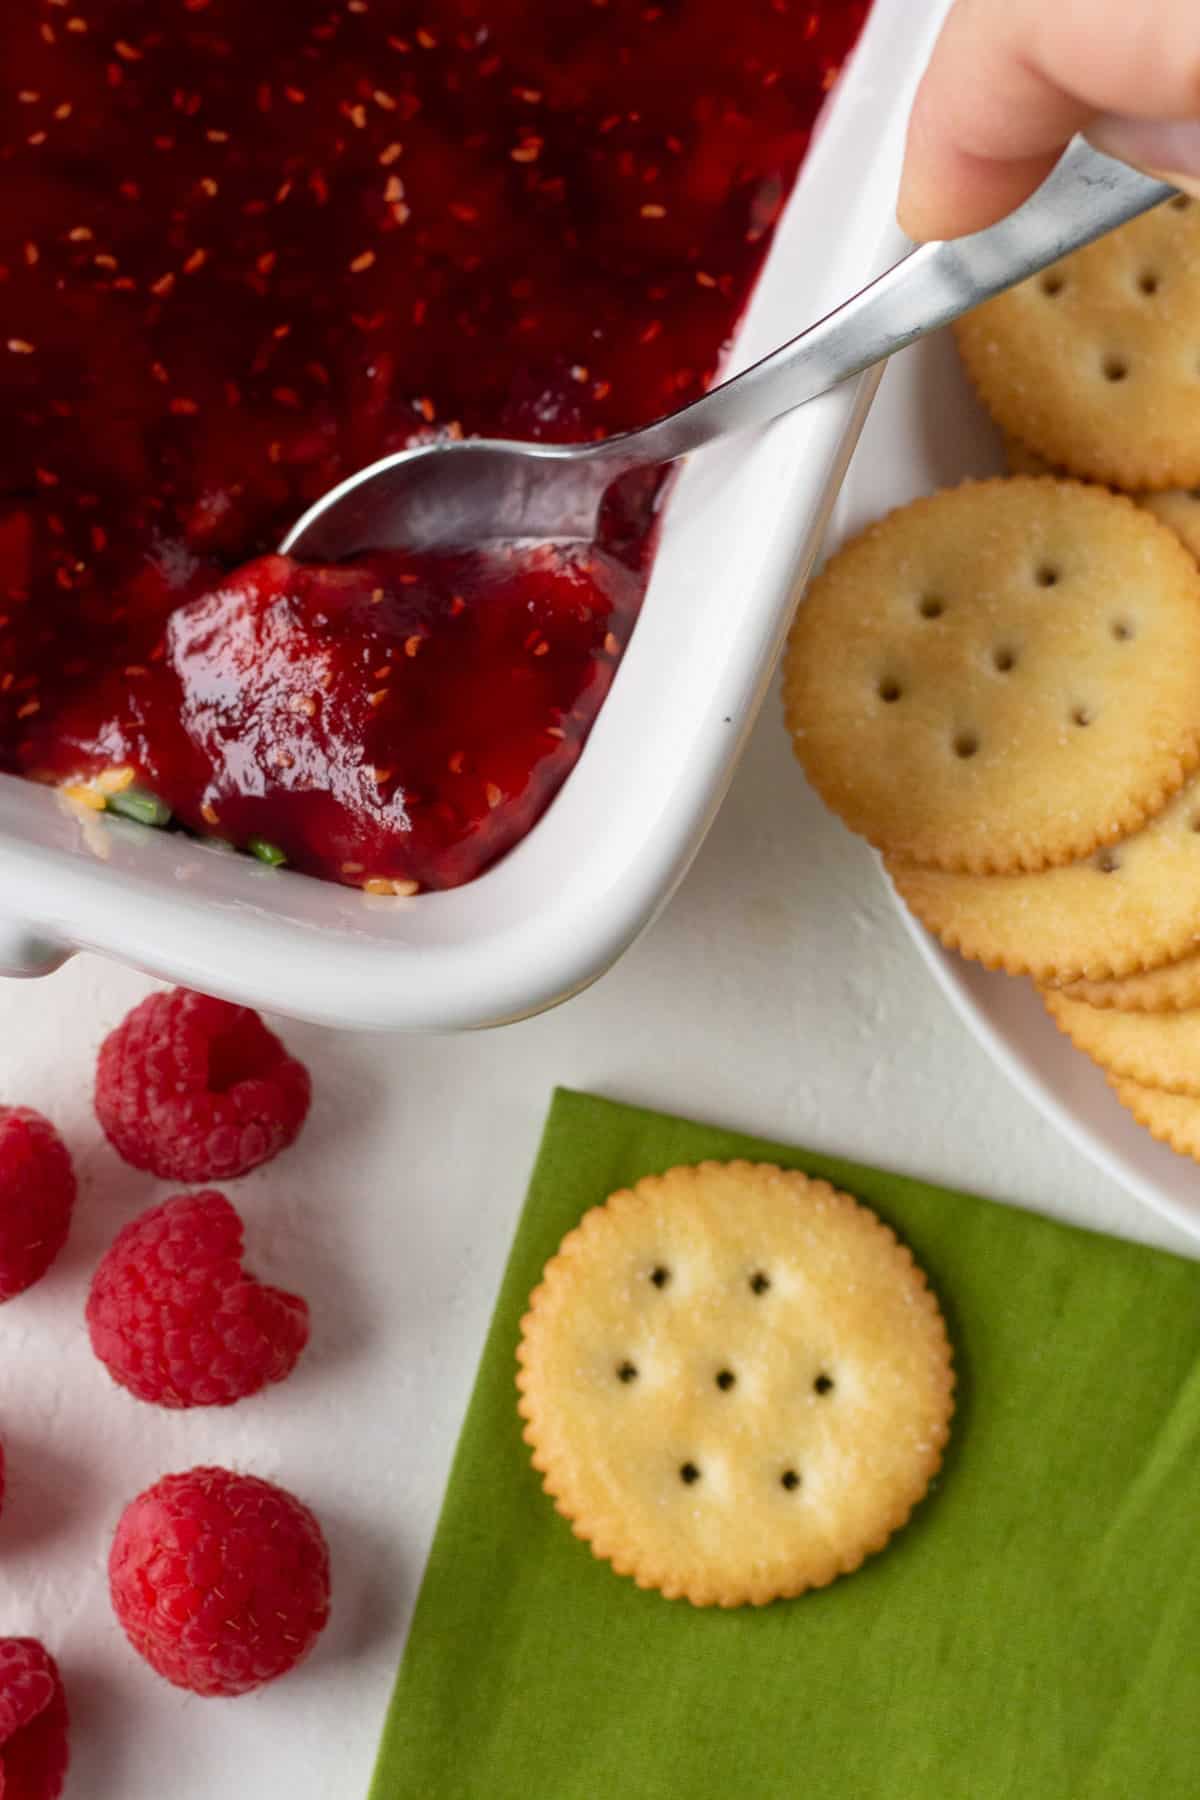 Spoon scooping raspberry dip out of a dish, sitting next to a pile of Ritz crackers.